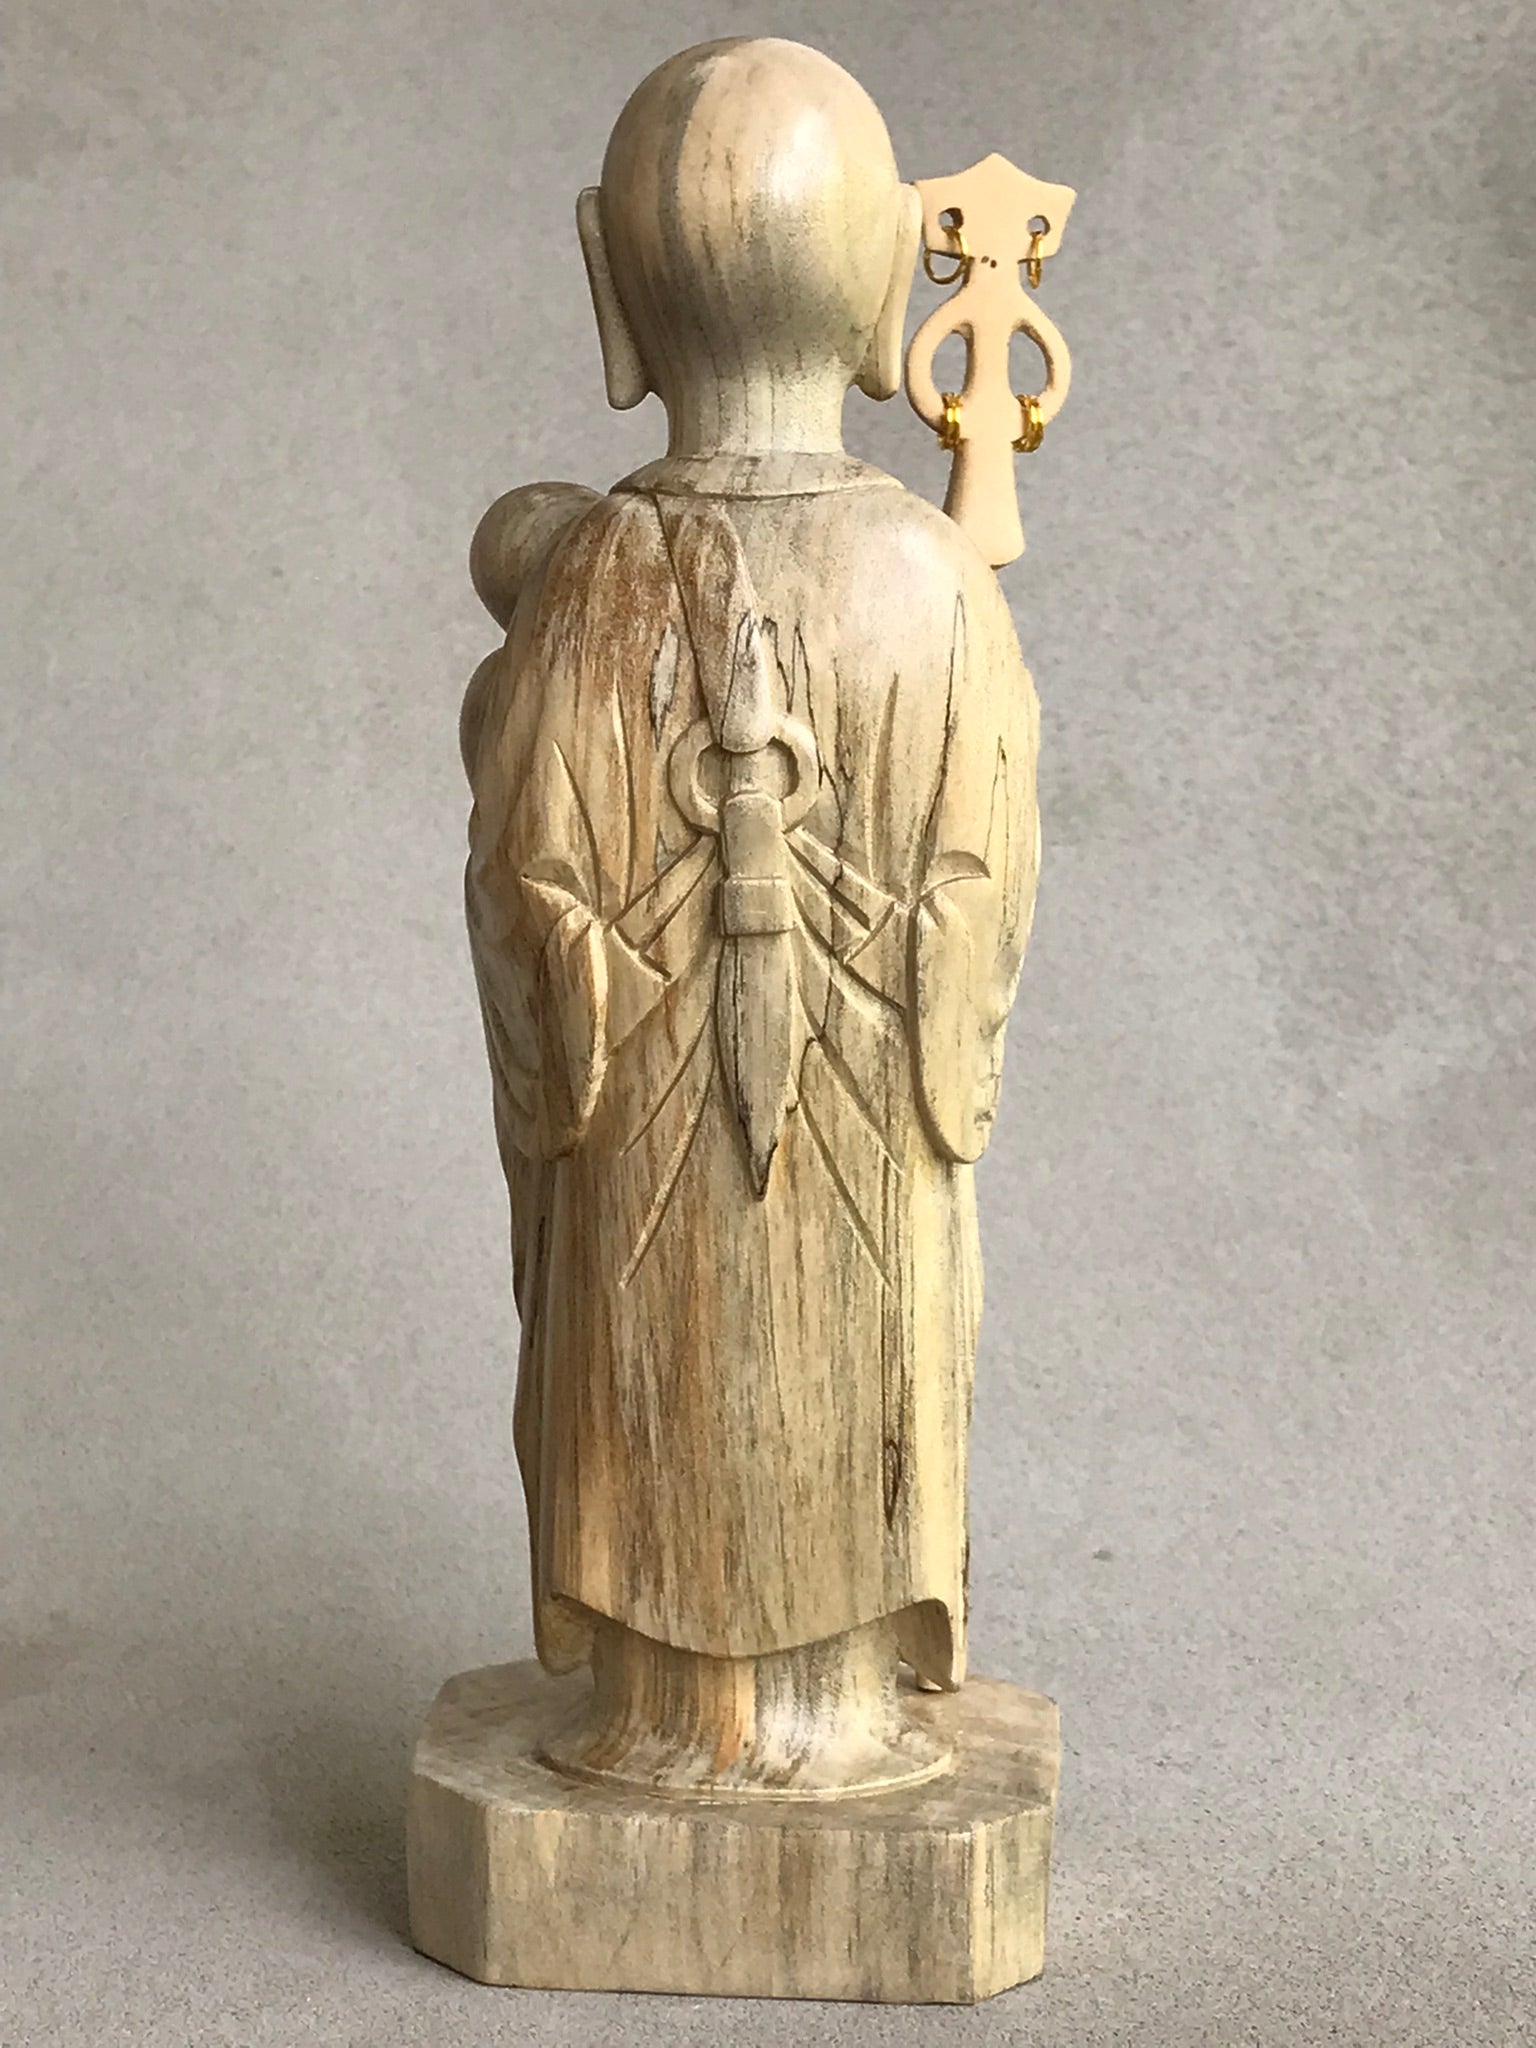 JIzo man standing, holding a staff and a baby, 25cm, 10 inches, color variation in wood from warm light brown to grey grain. back view.